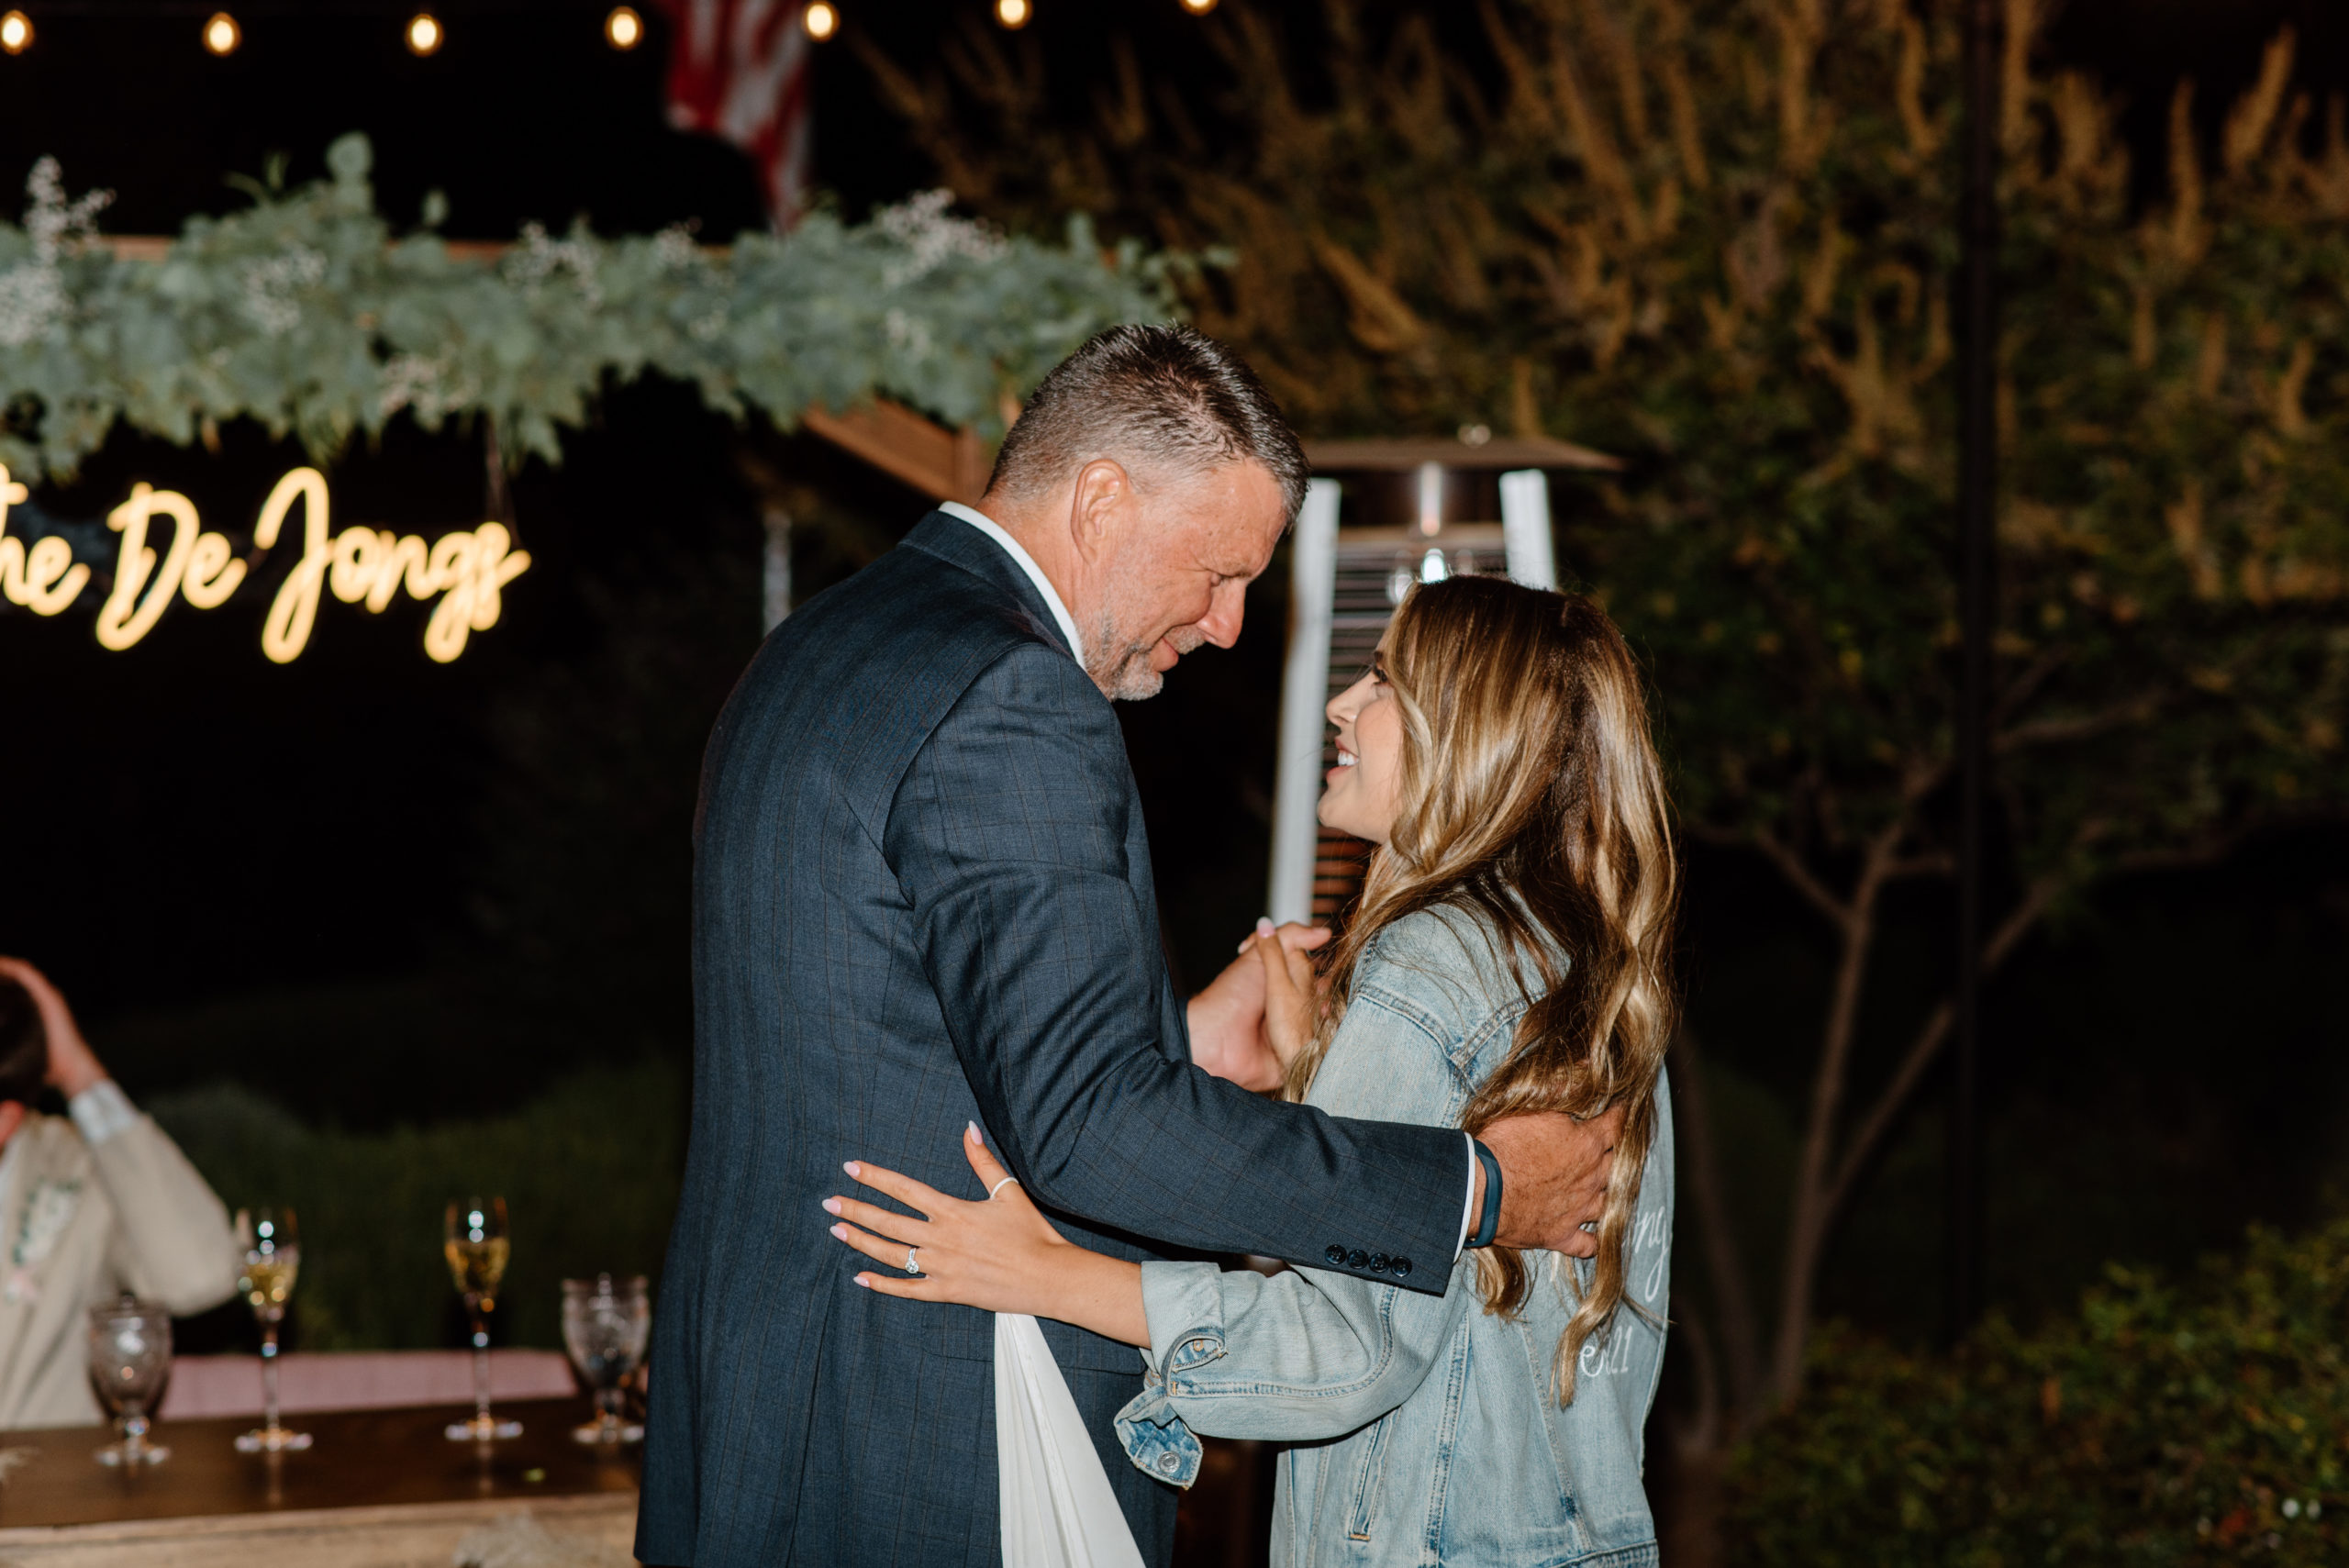 The bride dancing with her dad during the wedding reception